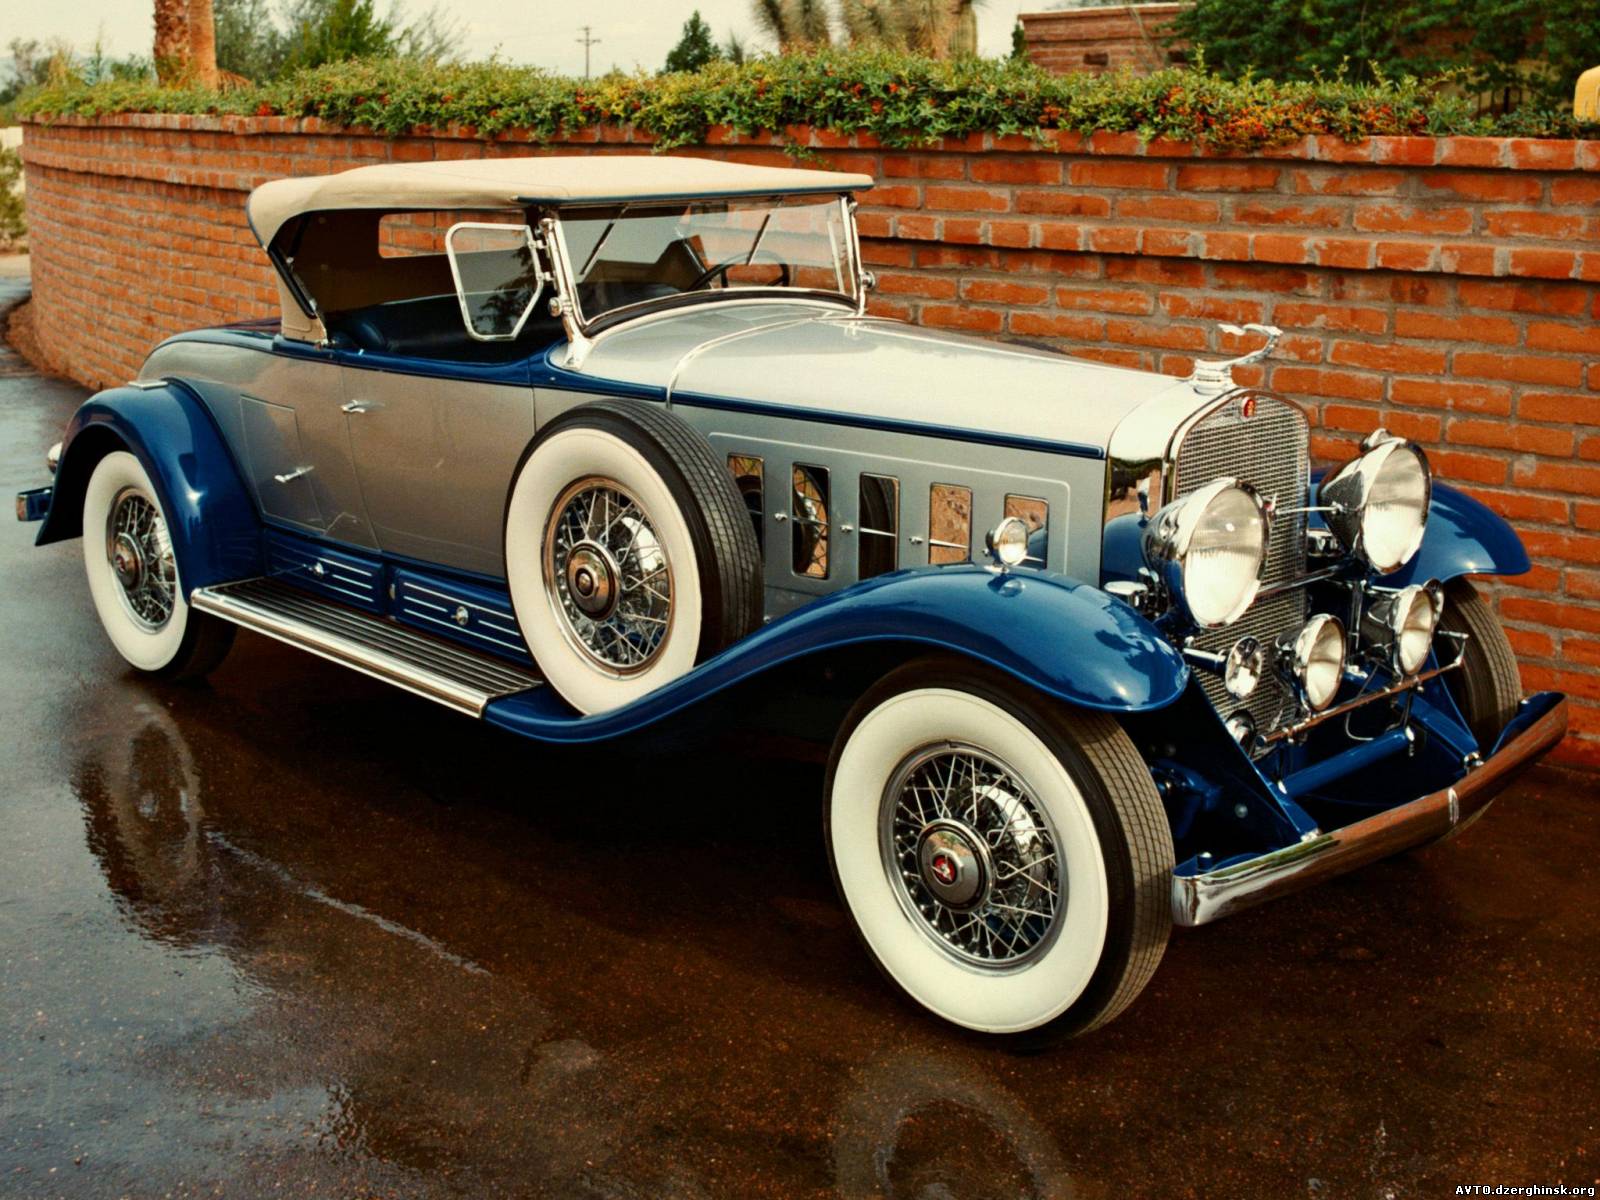 079. Cadillac V16 452 Roadster by Fleetwood 1930-1931